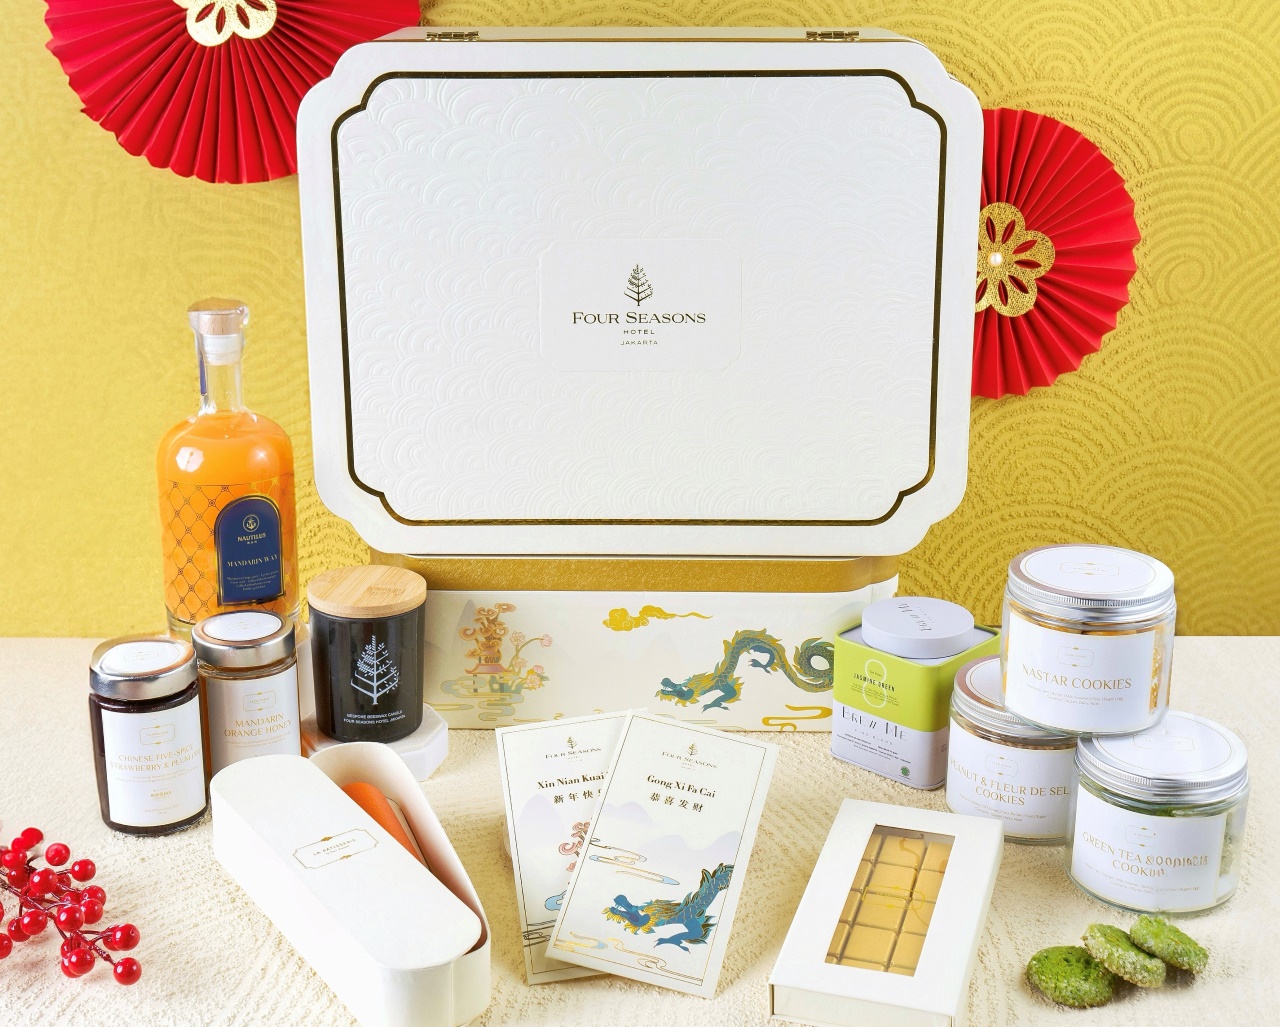 Welcome the Year of the Dragon with Festive Hampers and Gourmet Cakes from Four Seasons Hotel Jakarta